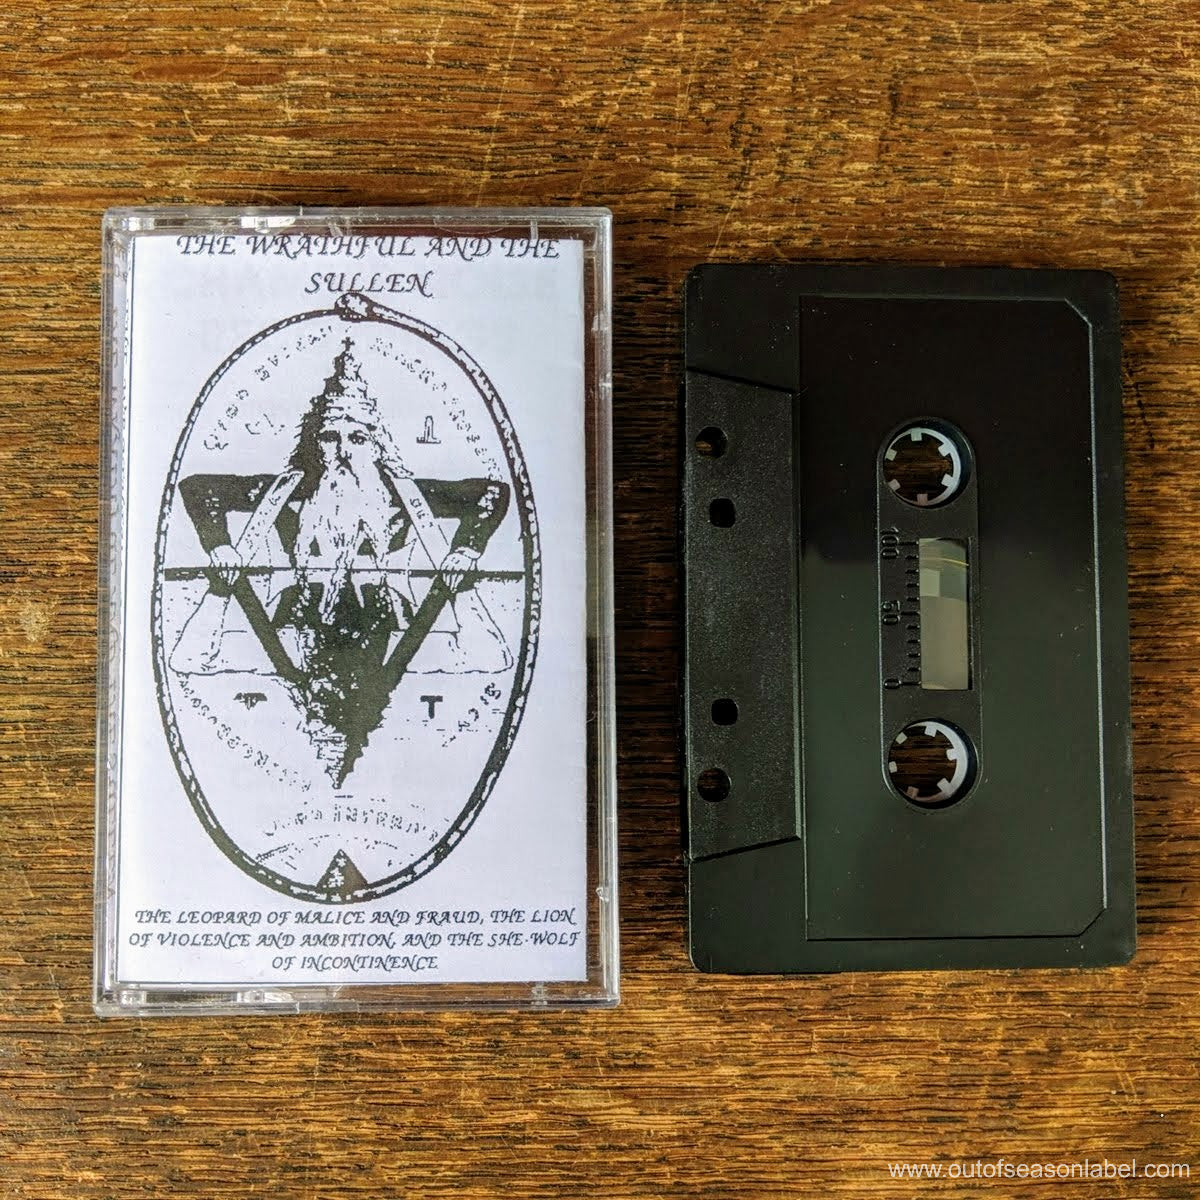 [SOLD OUT] THE WRATHFUL AND THE SULLEN "The Leopard Of Malice & Fraud" (1992) Cassette Tape